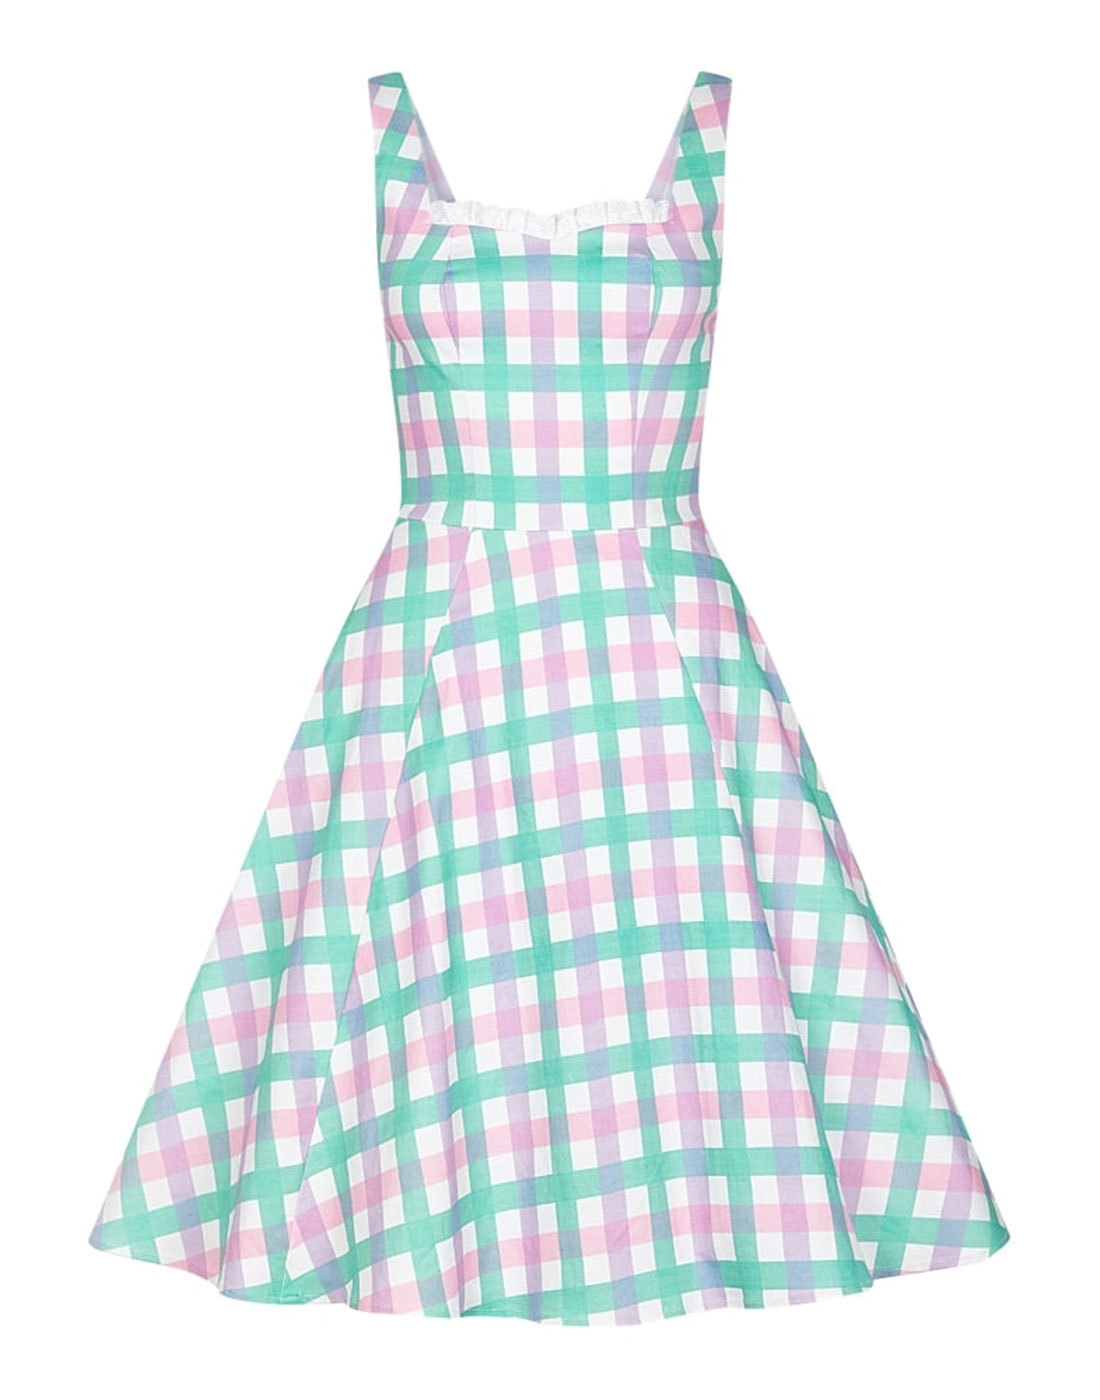 Chloe COLLECTIF Retro Candy Gingham Swing Dress